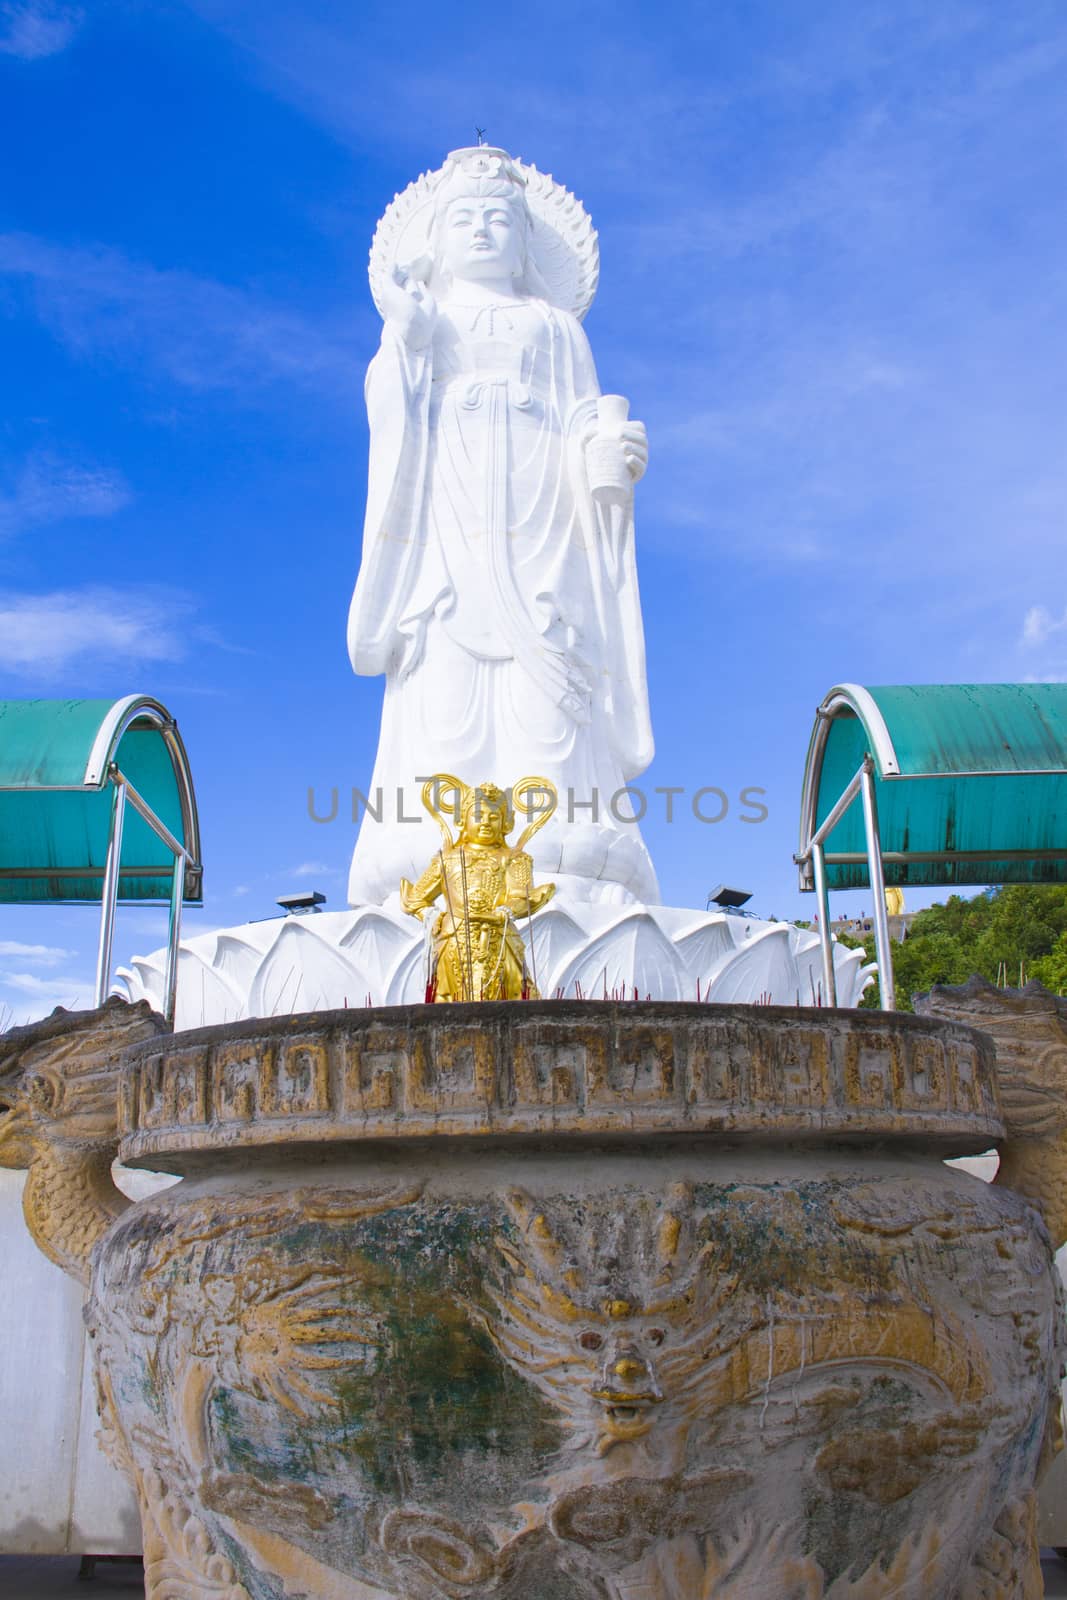 Park Guanyin by jee1999